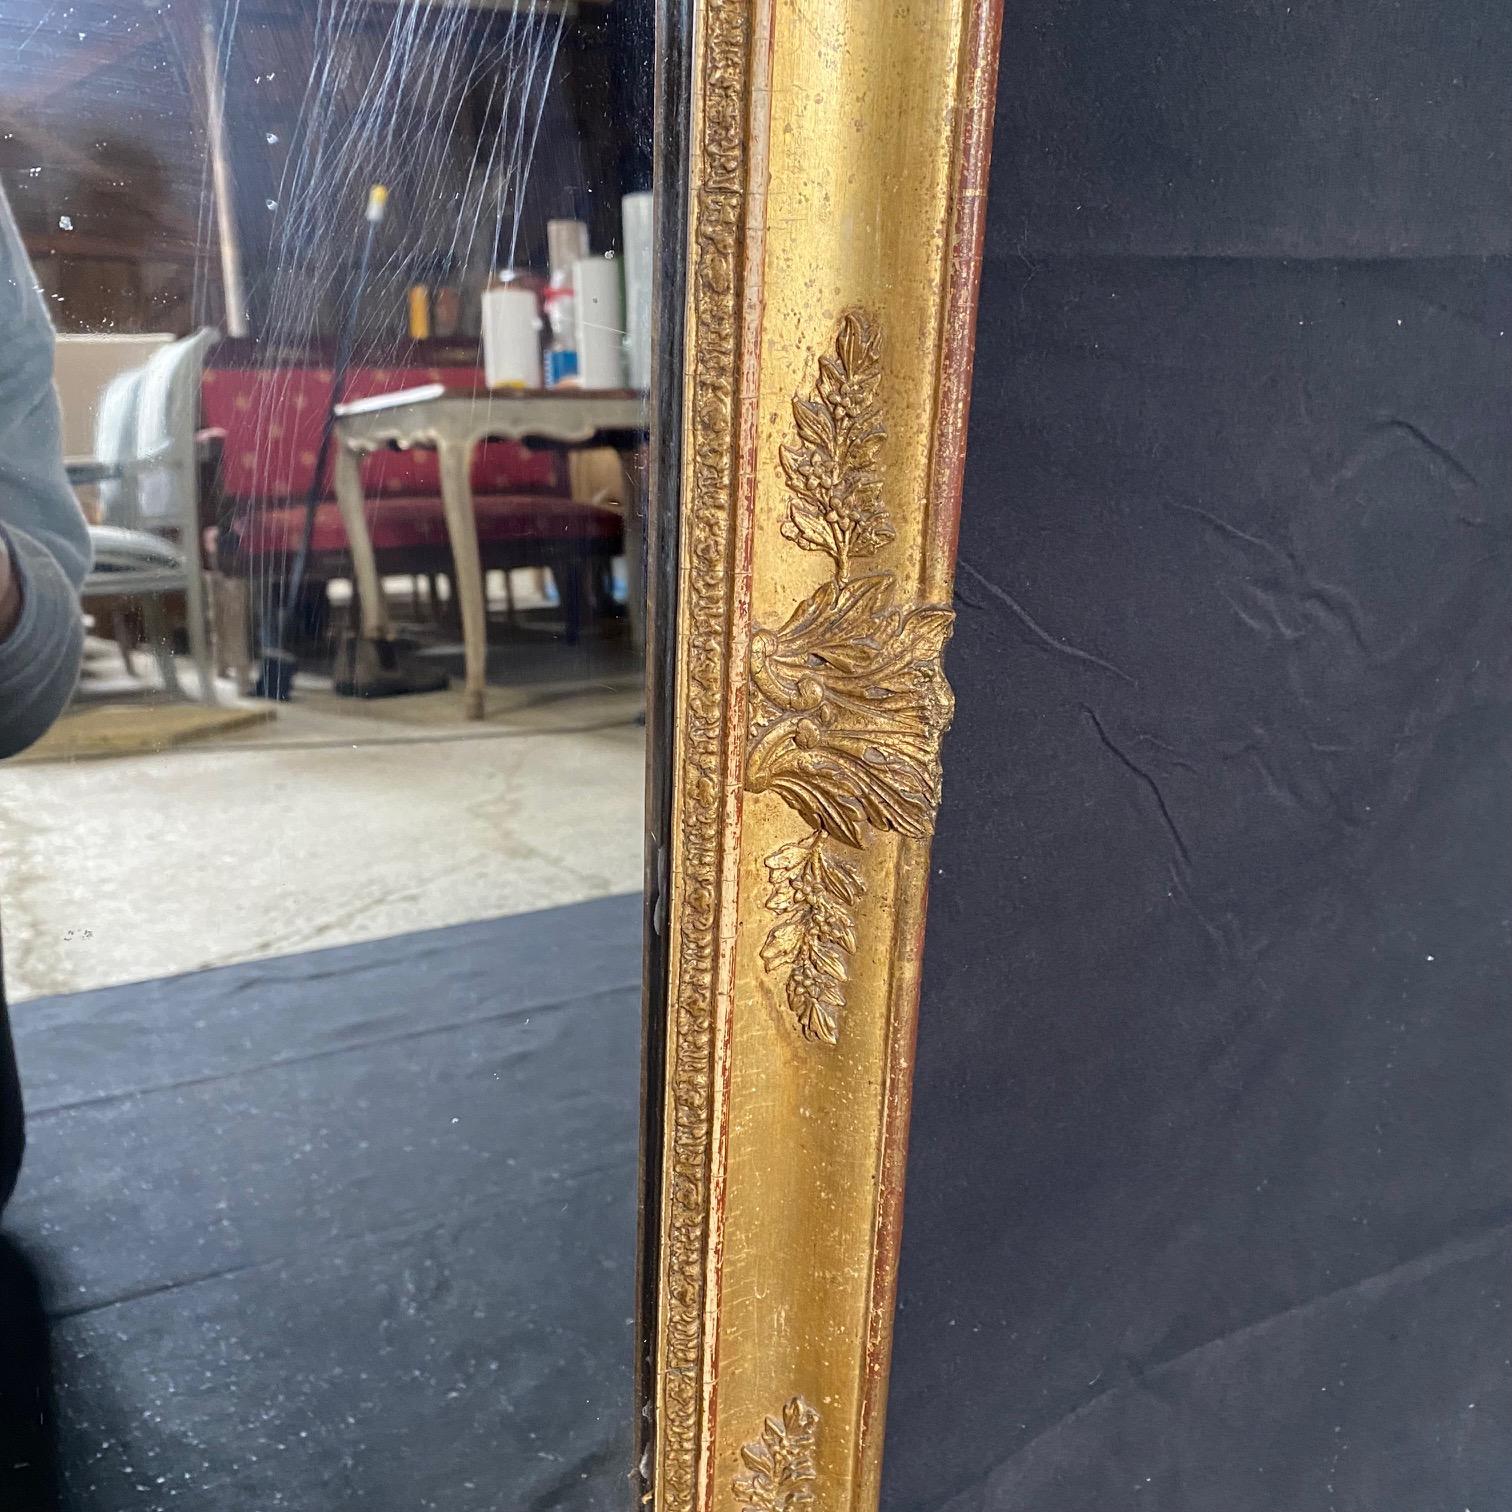 Rare Gem French Antique Louis XVI Mirror with Intricate Fronton Carving  For Sale 3